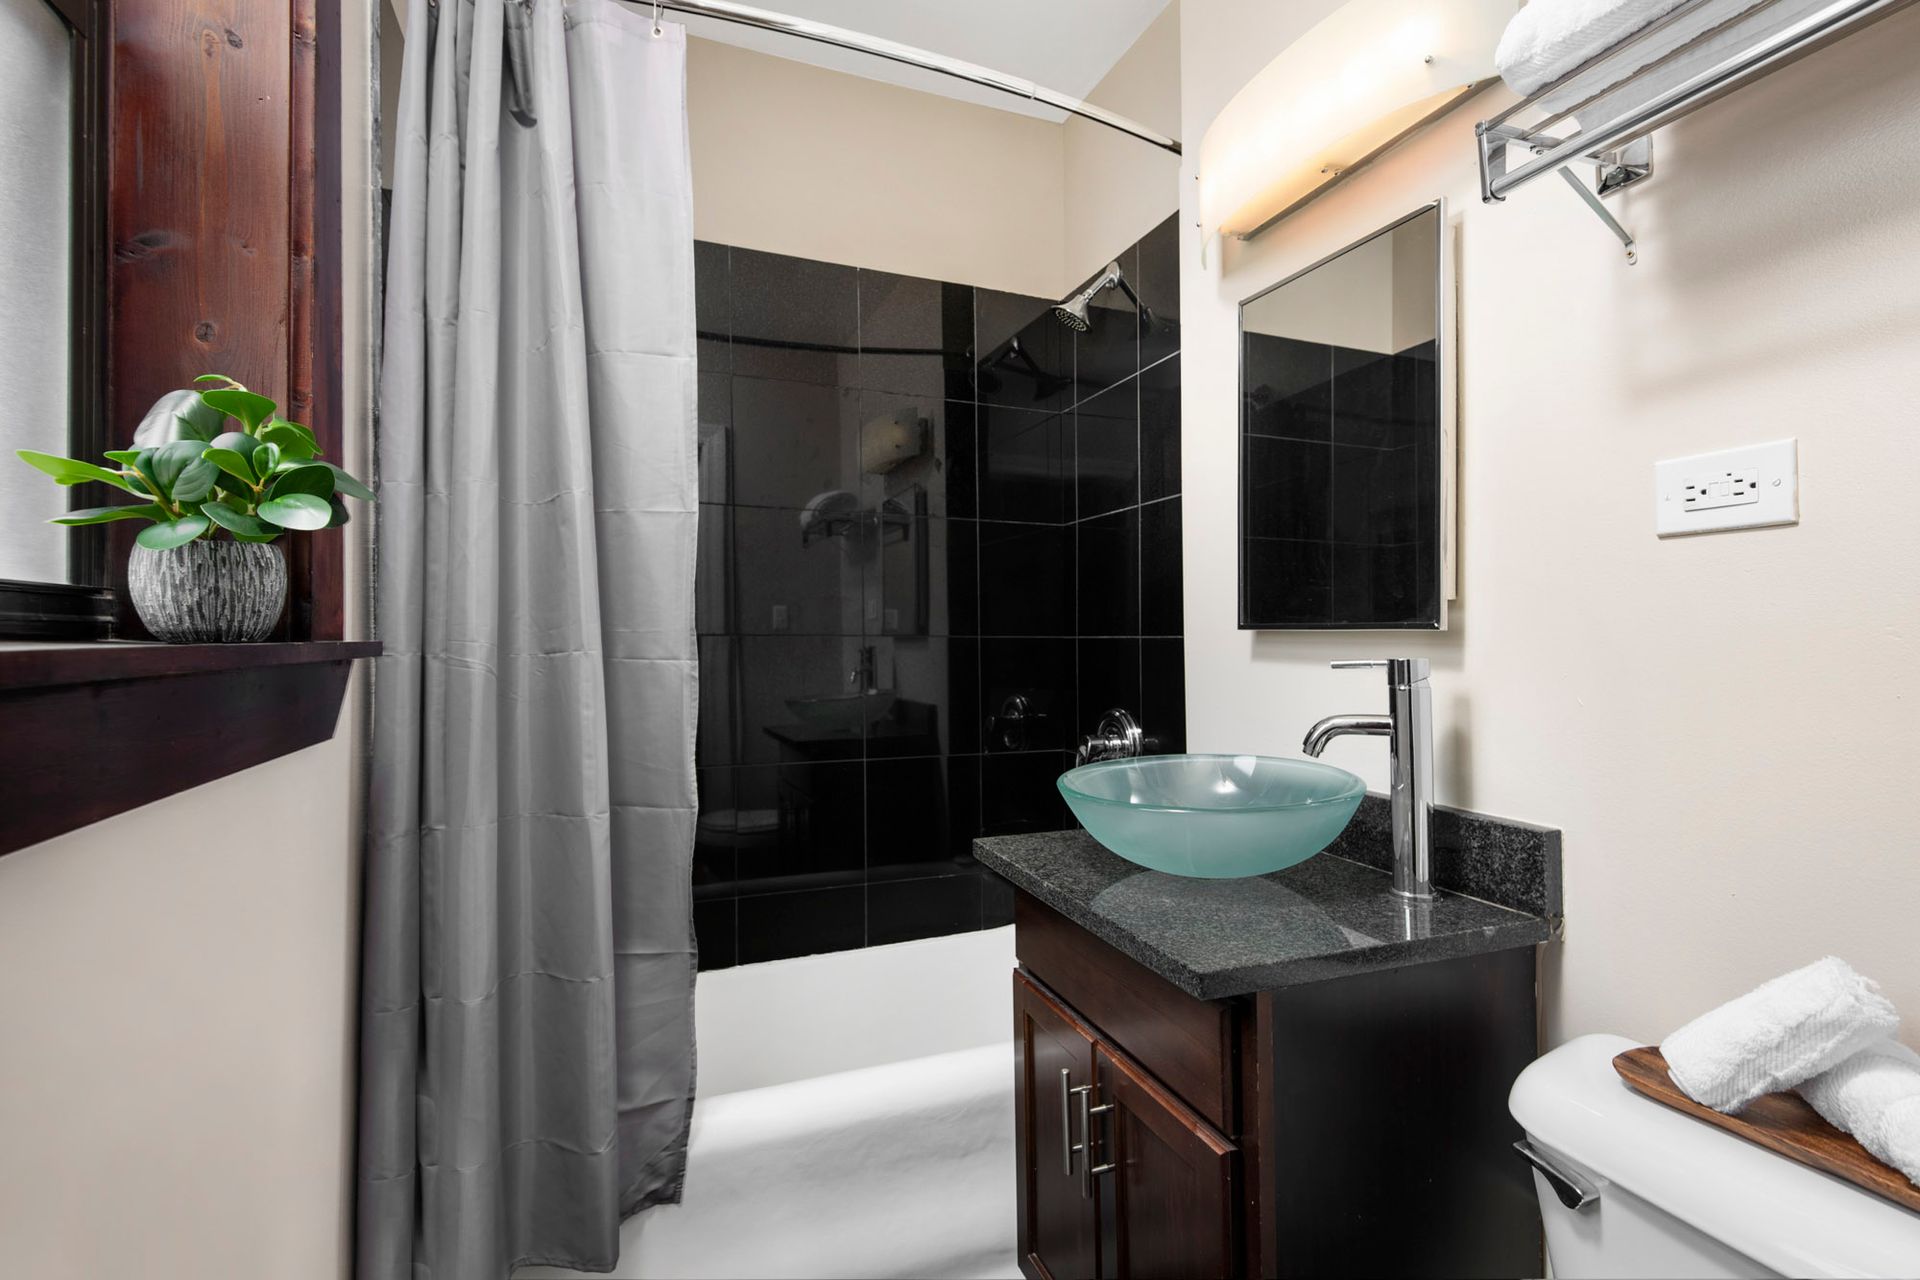 A bathroom with a sink, tub, mirror, and shower curtain at Reside at Belmont Harbor. 